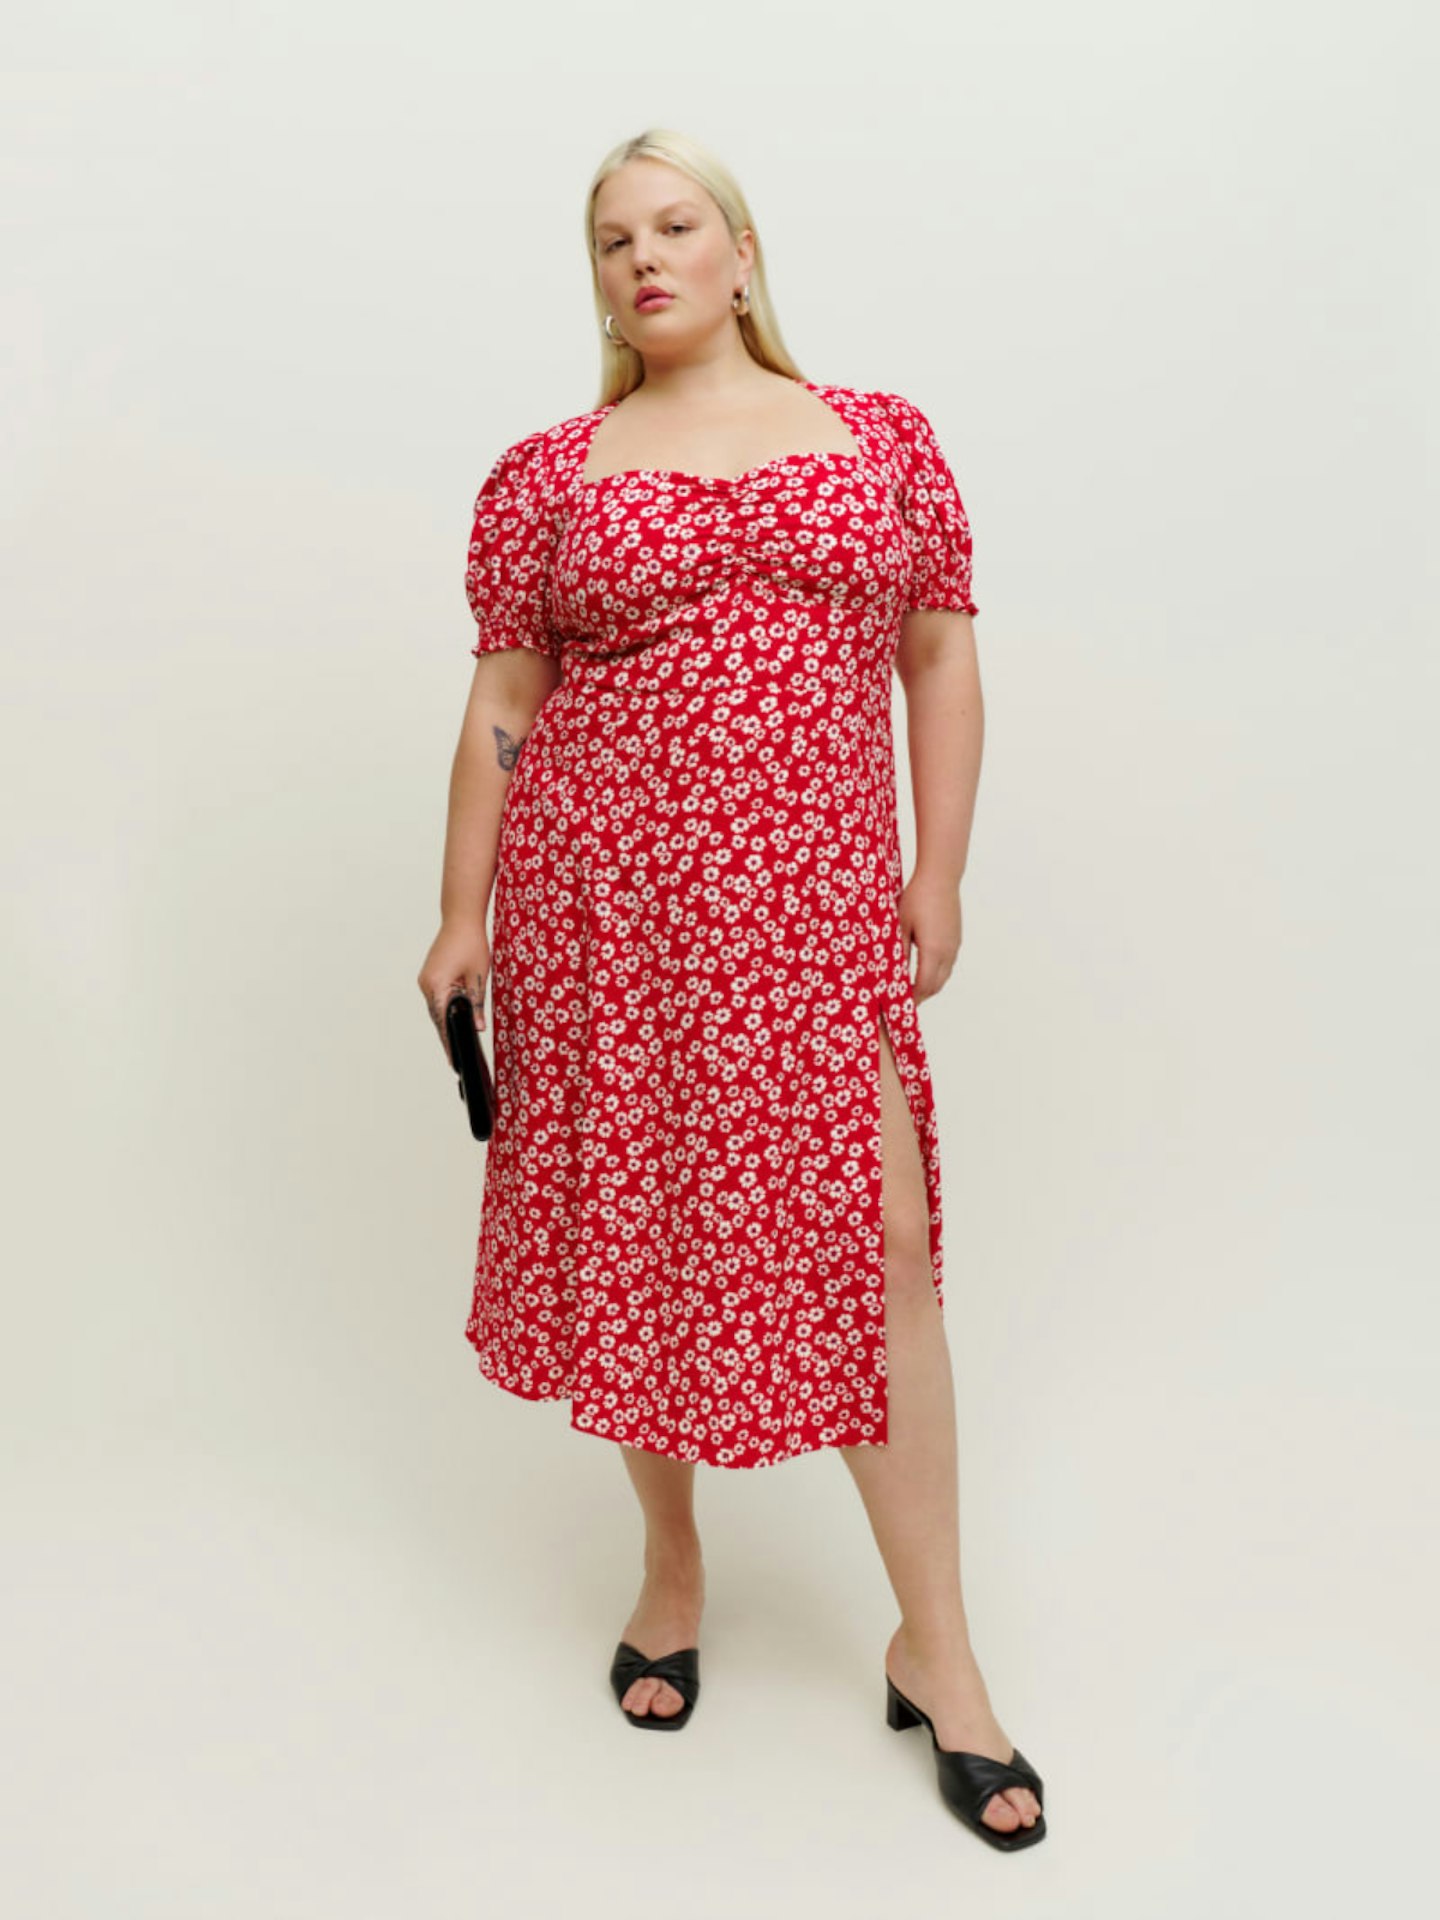 Best Maternity Plus-Size Dresses: Where To Buy Right Now